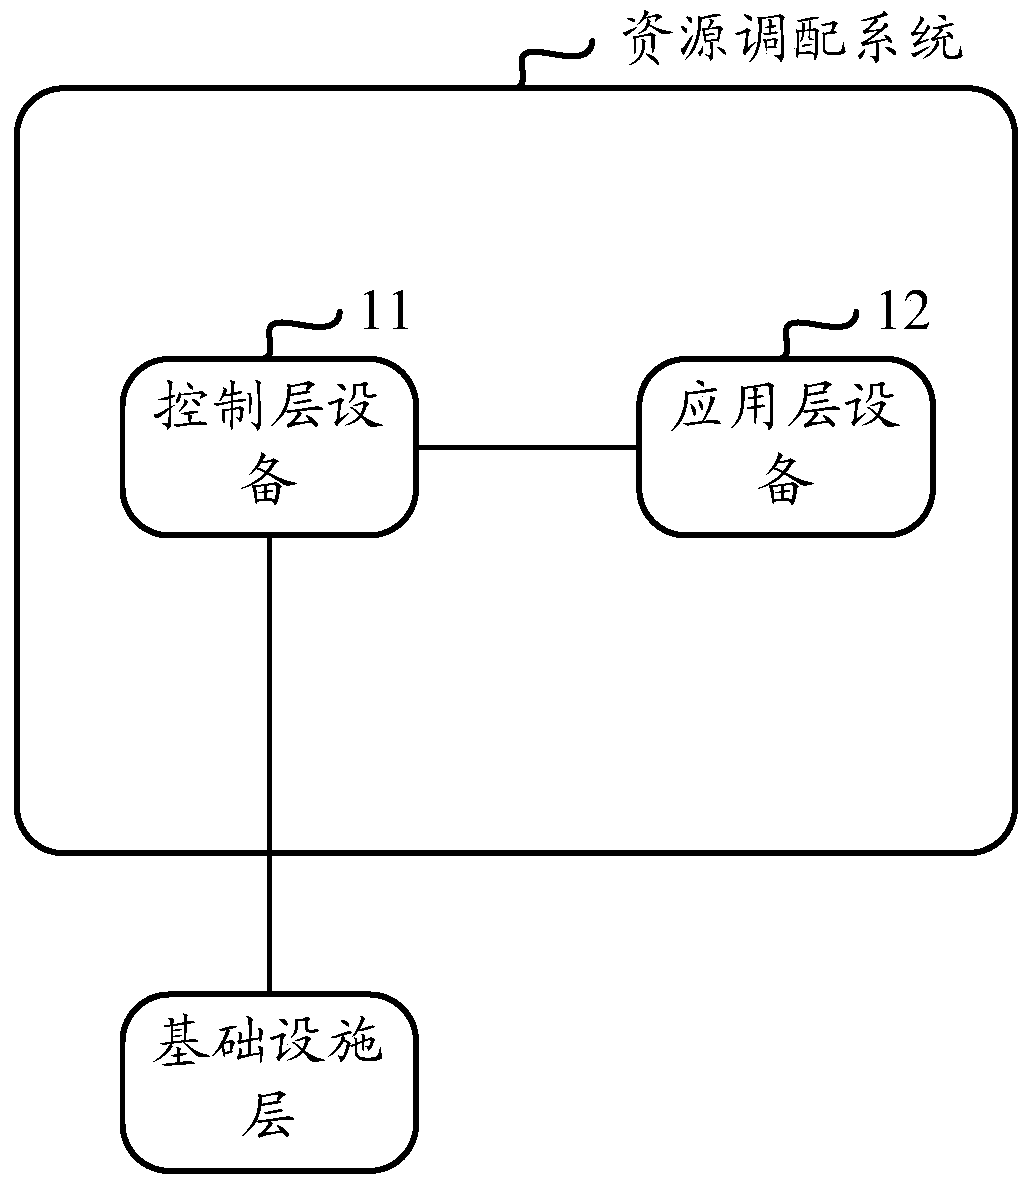 A resource allocation system, base station, equipment and method